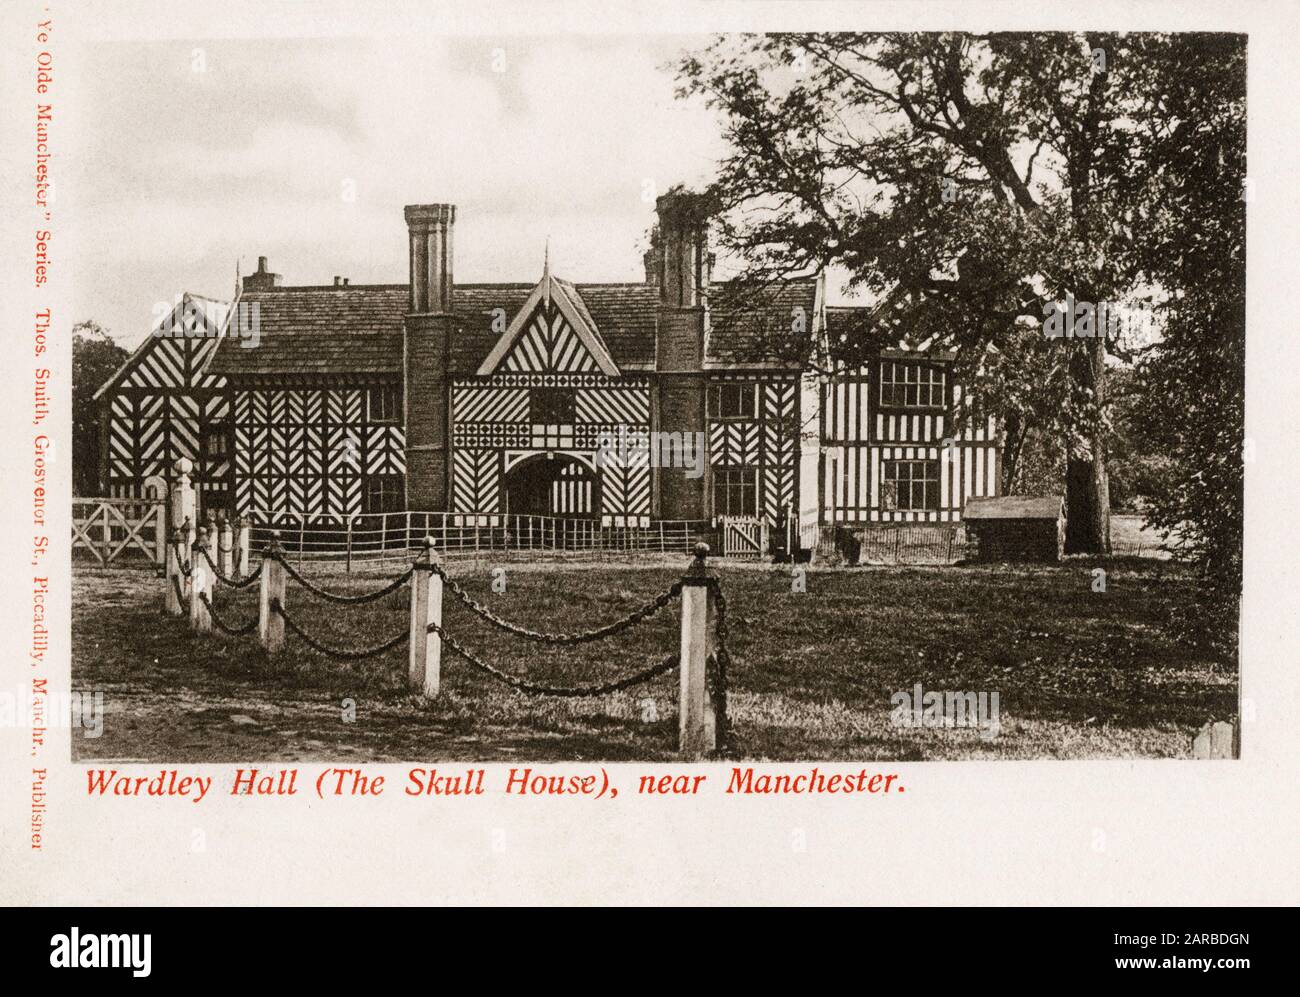 Wardley Hall (The Skull House), near Manchester (completed c.1500) - an early medieval manor house and a Grade I listed building in the Wardley area of Worsley, Salford, in Greater Manchester. The skull of St Ambrose Barlow, one of the Forty Martyrs of England and Wales, is preserved in a niche at the top of the main staircase. He was hanged, drawn and quartered at Lancaster on 10 September 1641 after confessing to being a Catholic priest. According to legend, it is a screaming skull. Extensively re-modelled in the 19th and 20th centuries. Stock Photo